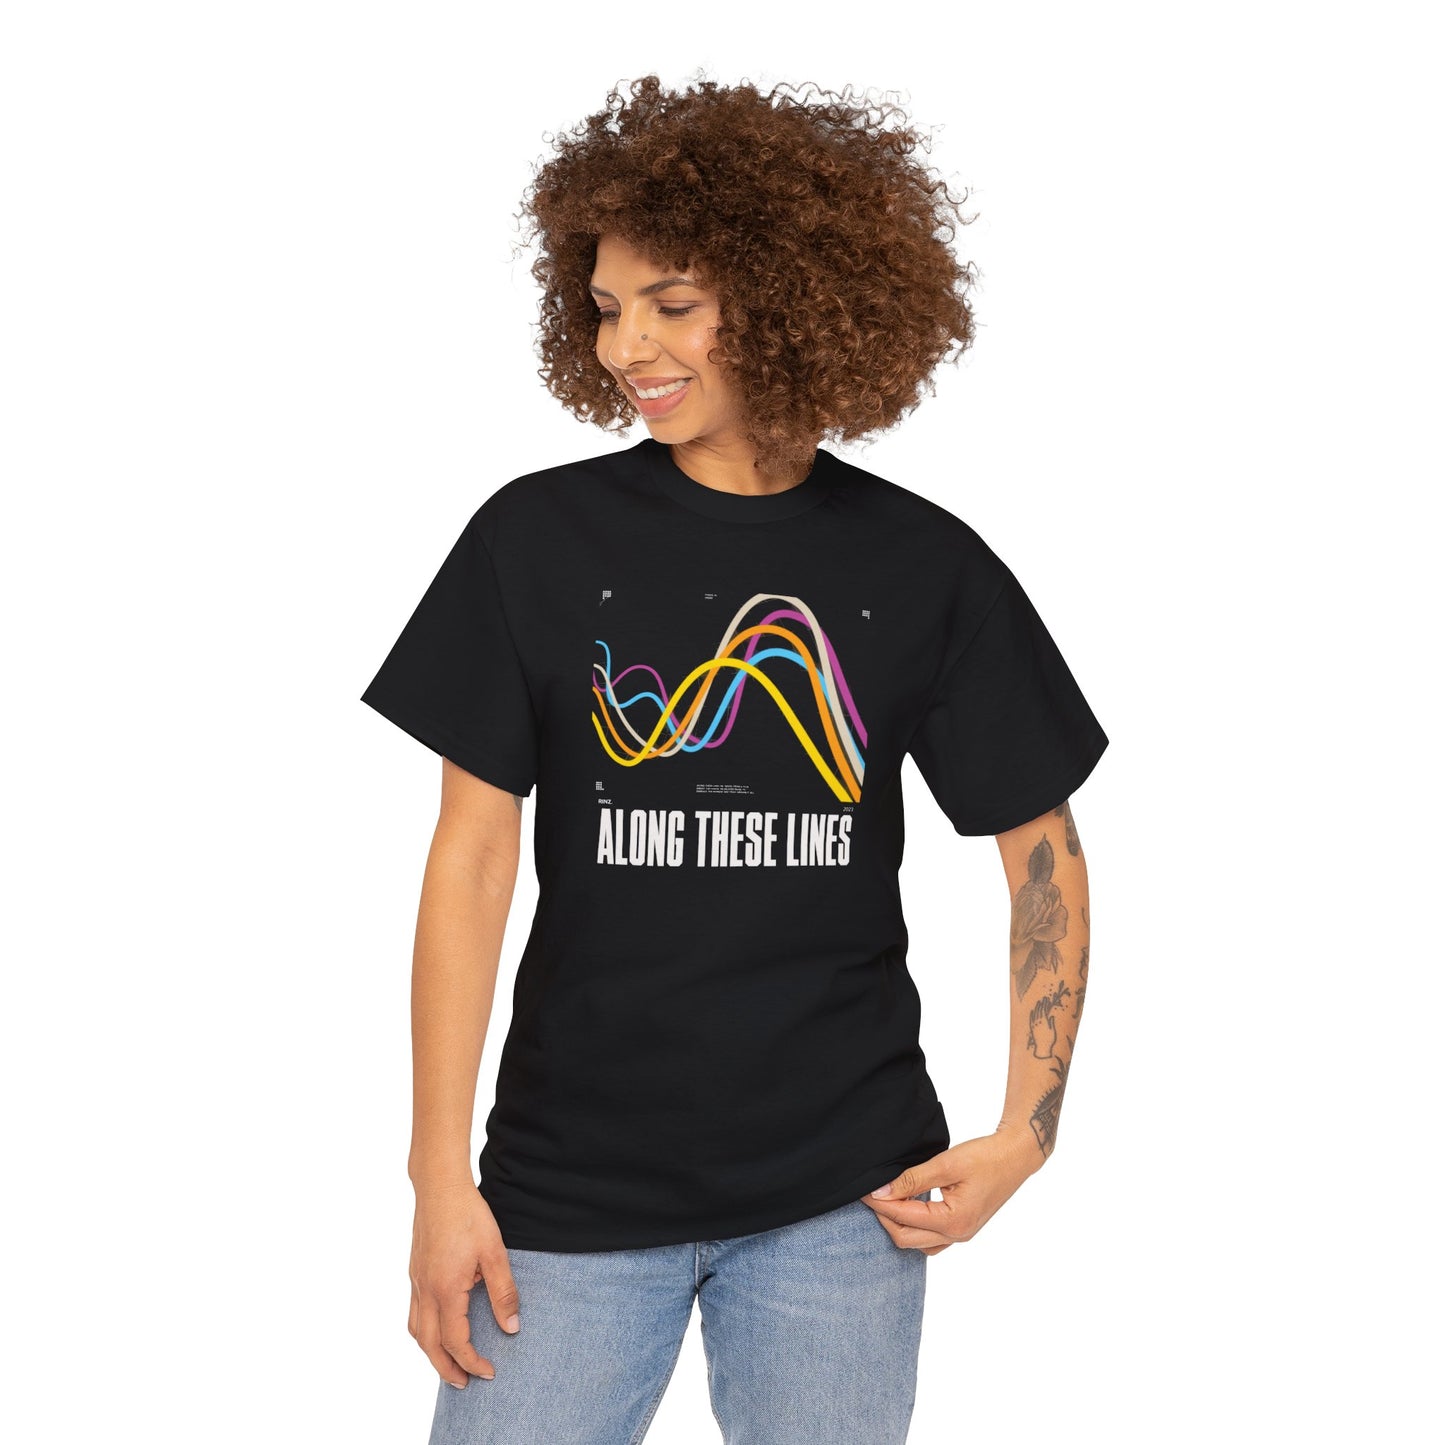 T-Shirt - Along These Lines - Black